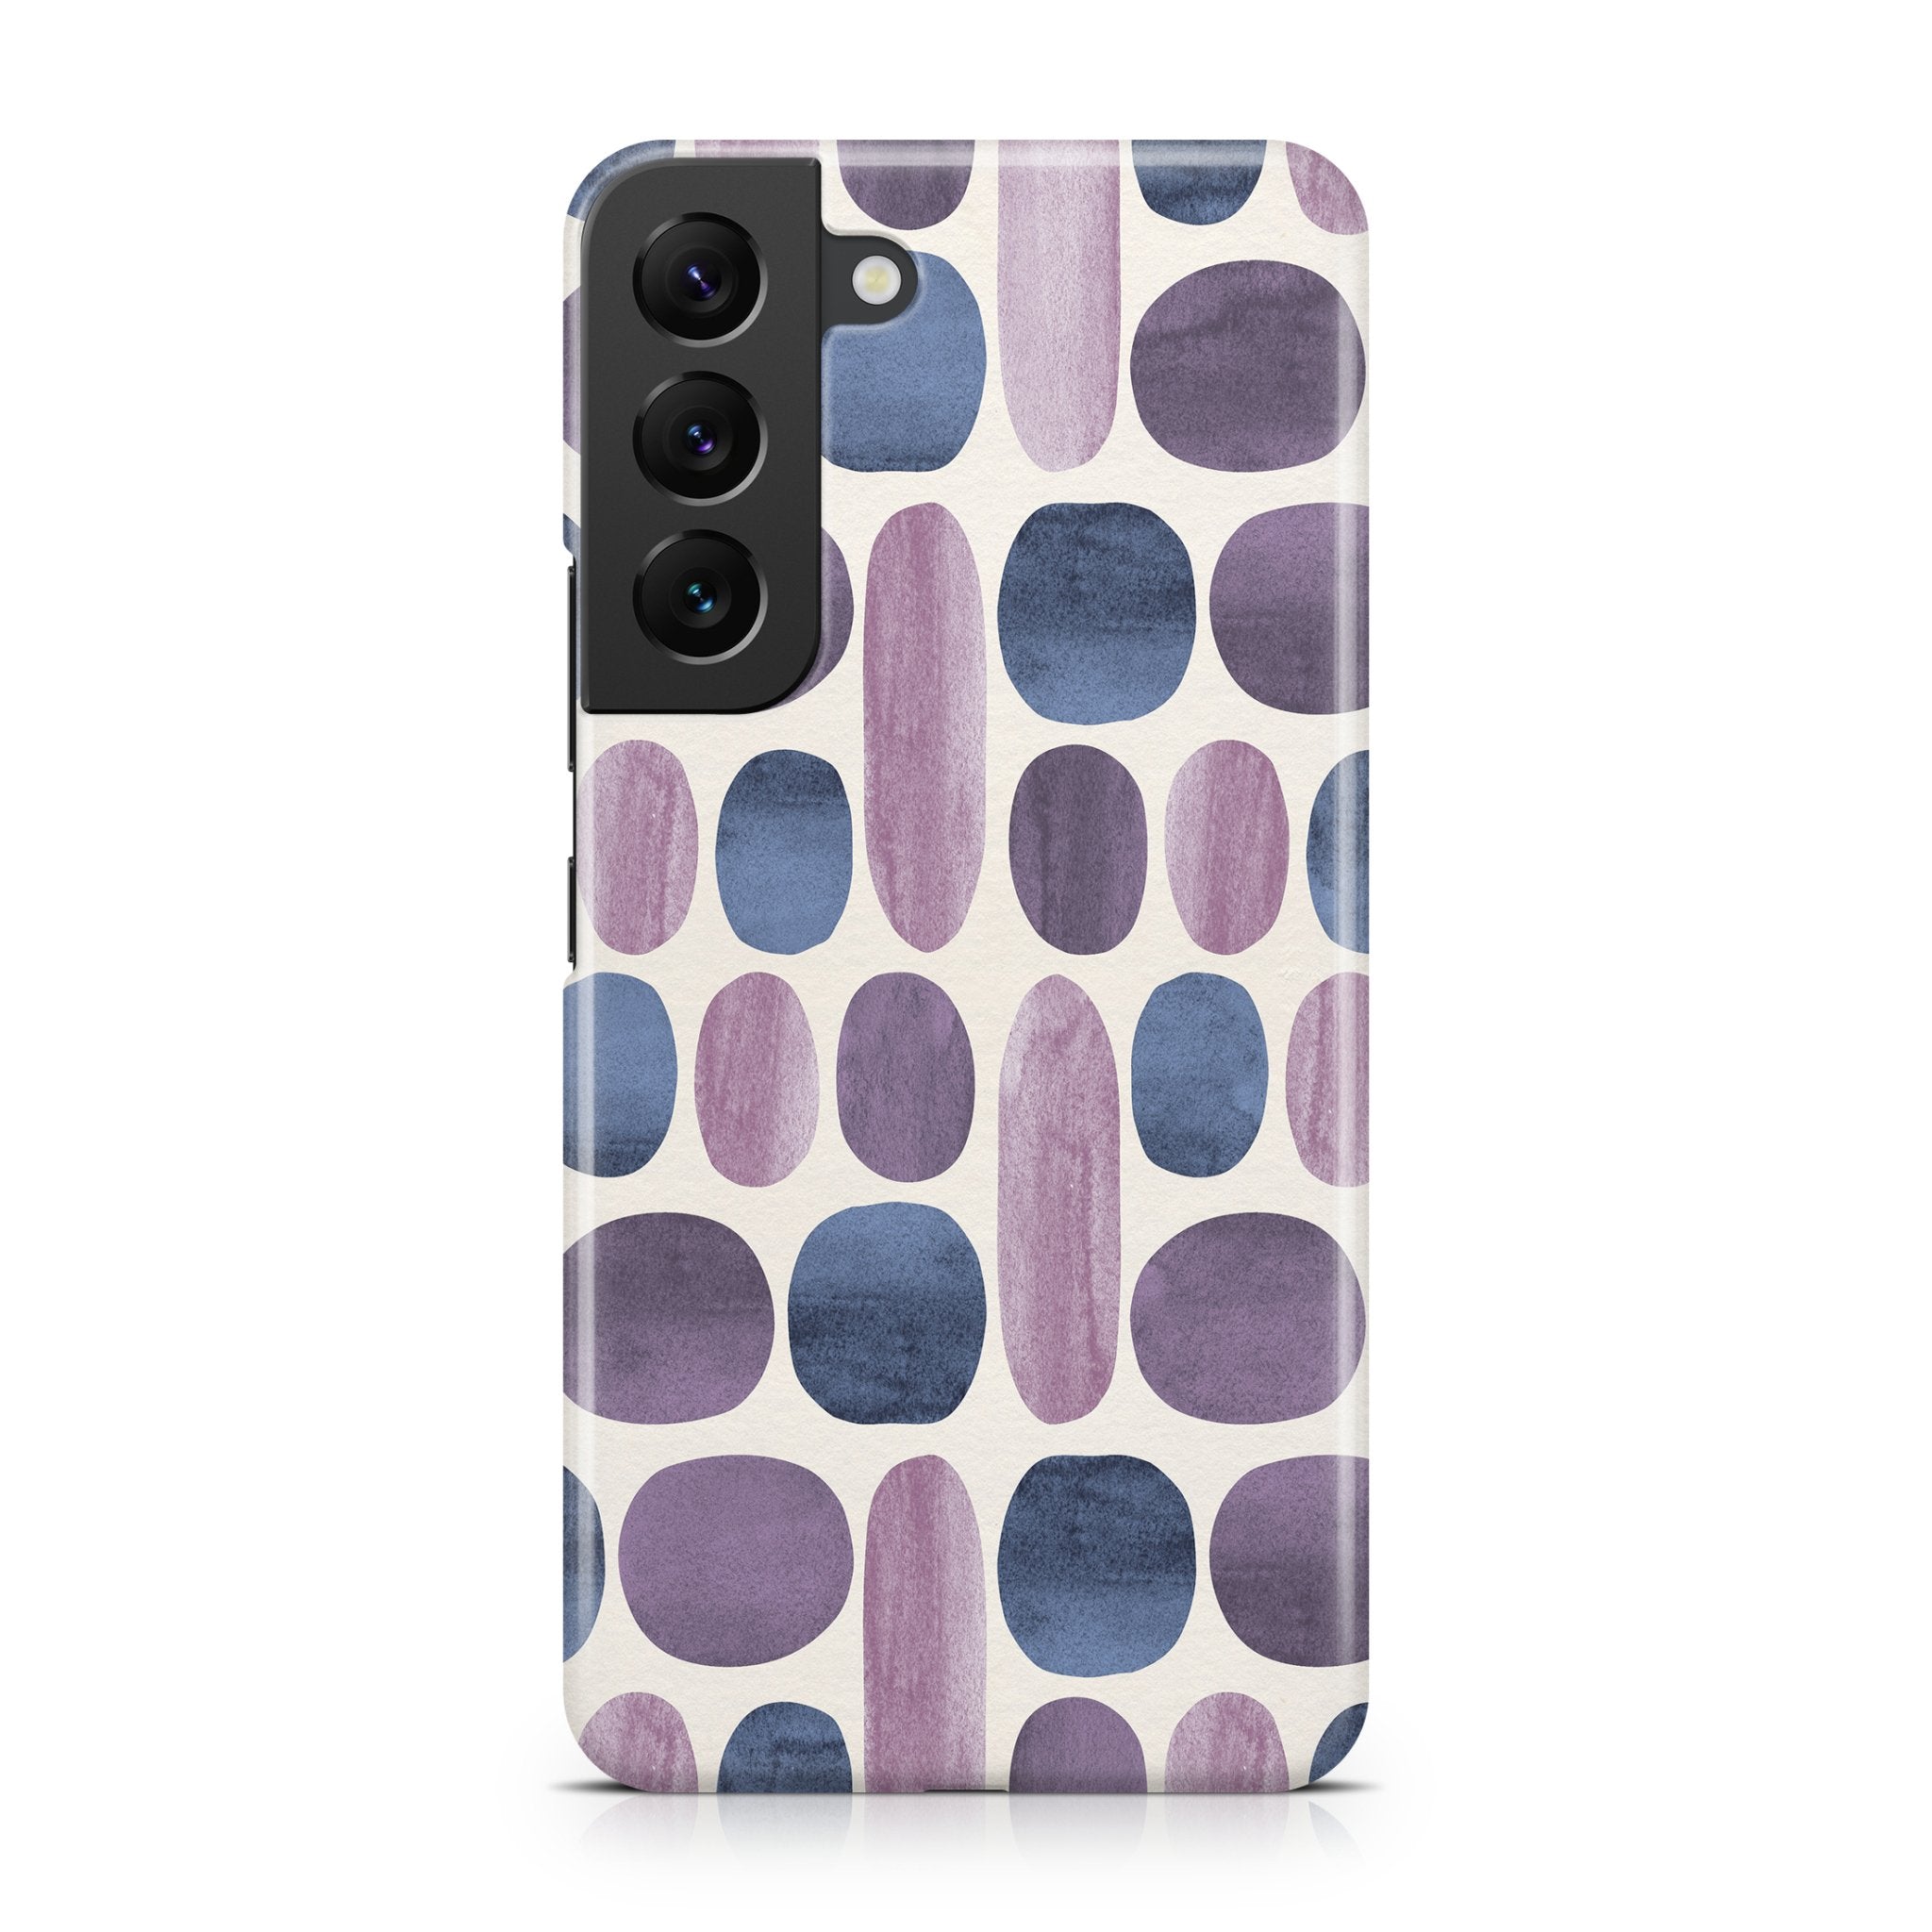 Indigo & Orchids - Samsung phone case designs by CaseSwagger